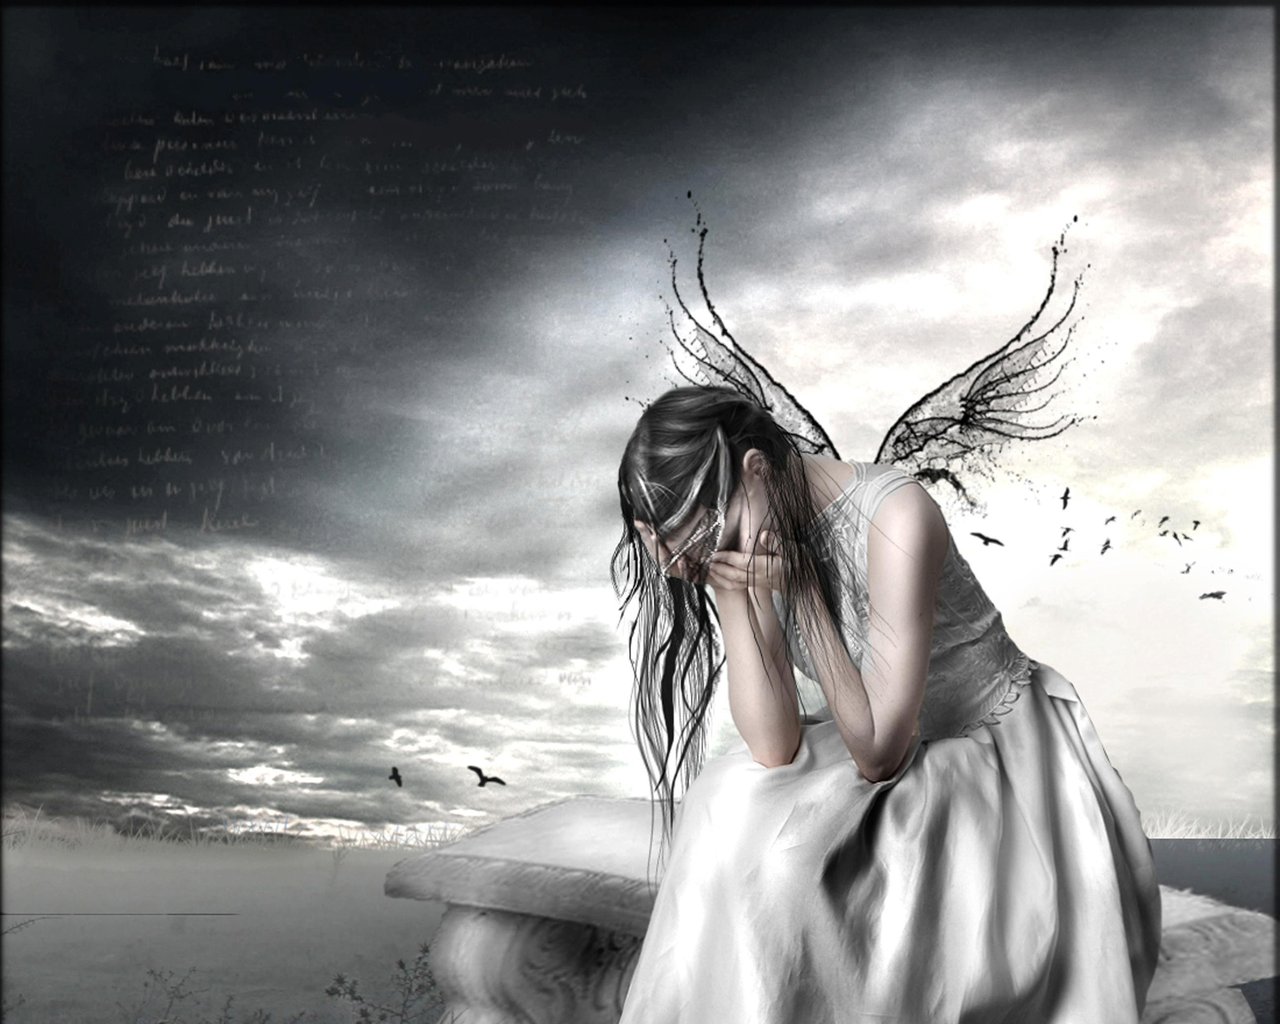 weeping wallpaper,photography,cg artwork,stock photography,daydream,black and white